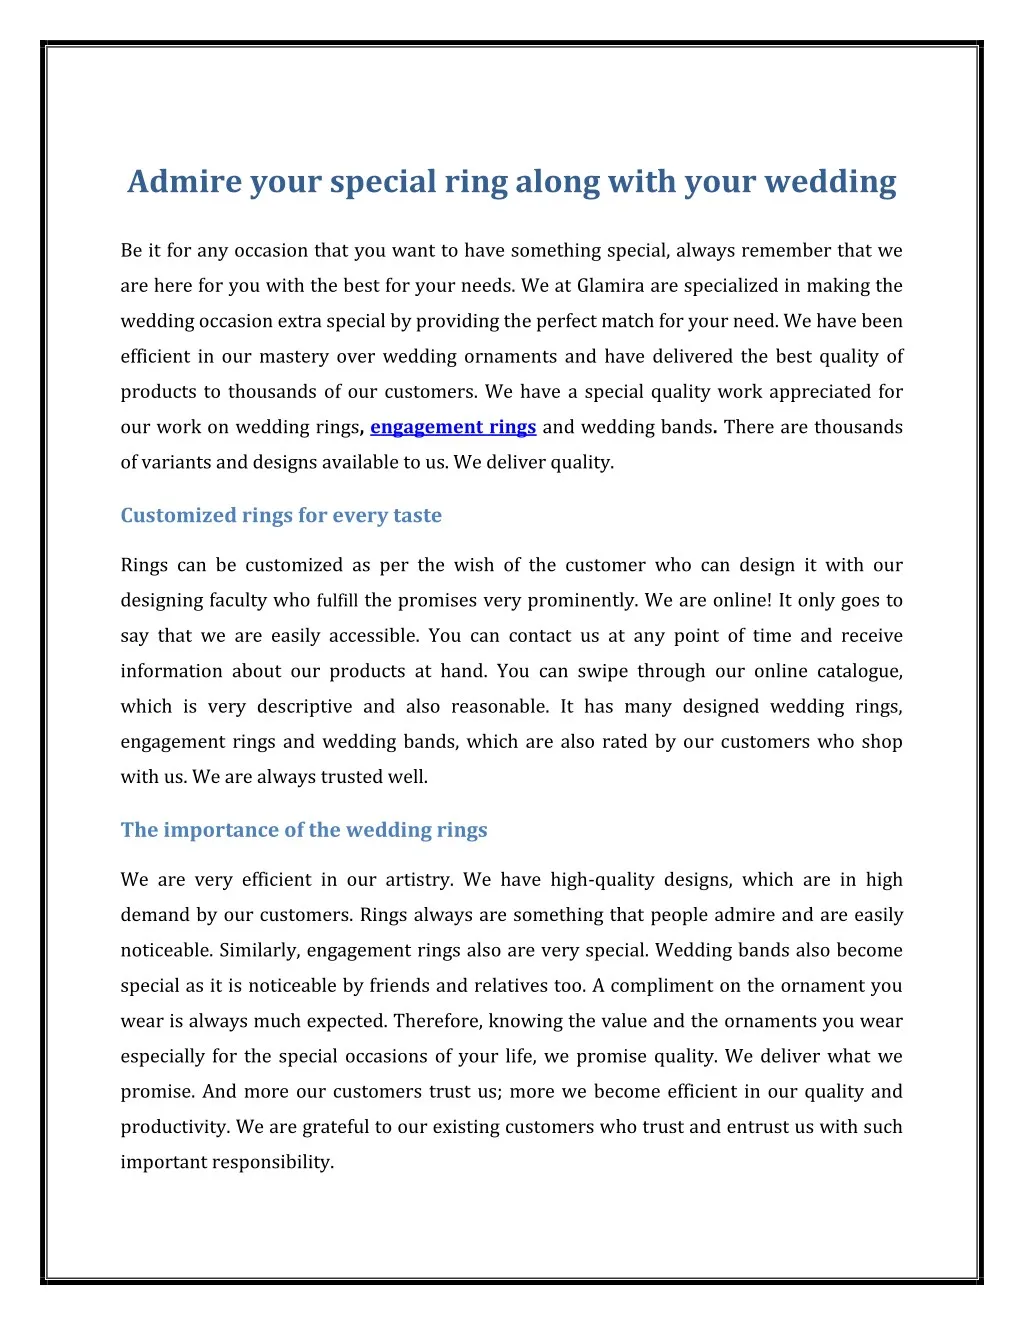 admire your special ring along with your wedding